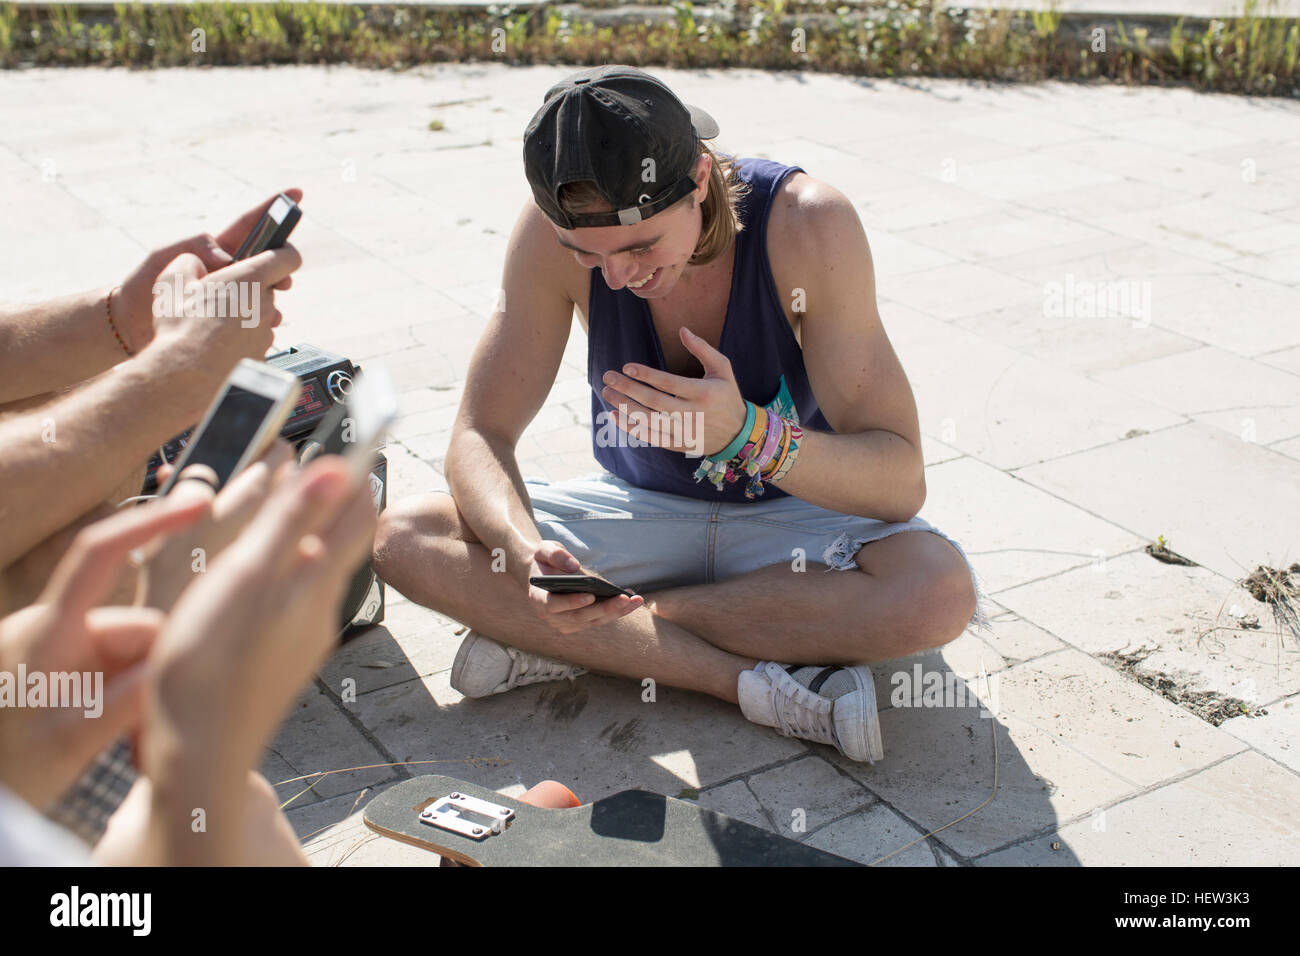 Friends social-networking on smartphones Stock Photo